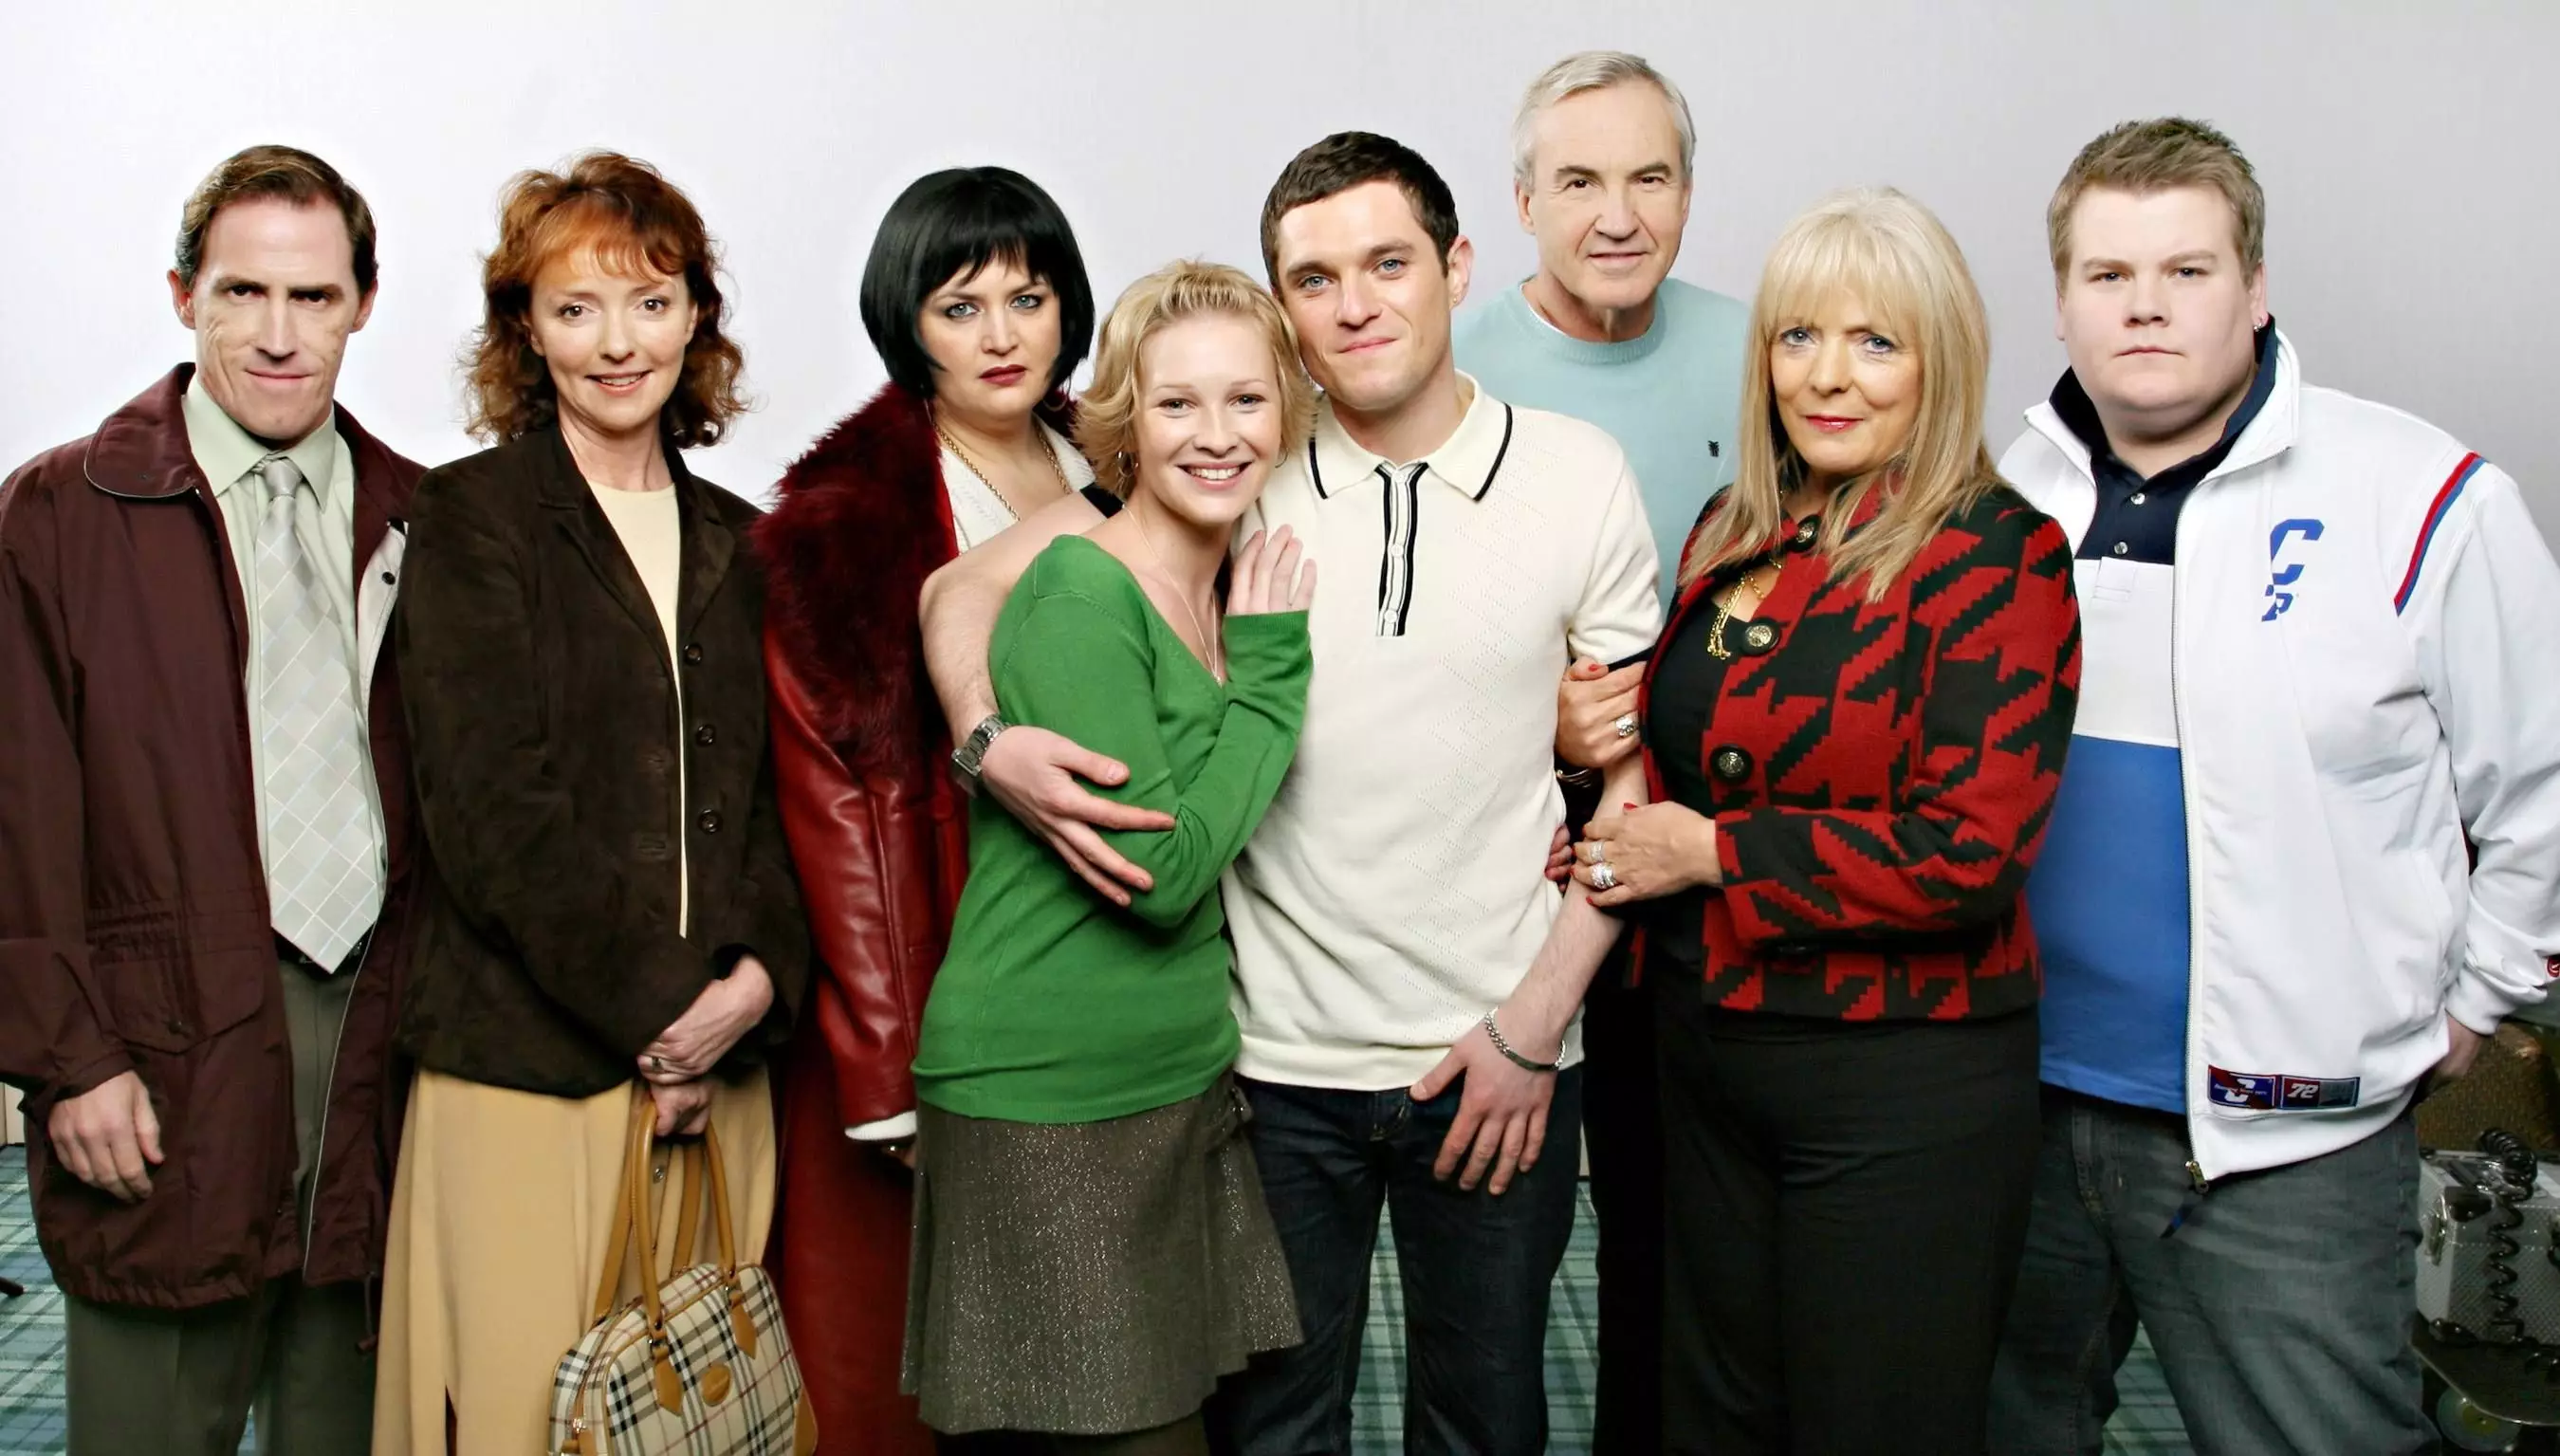 'Gavin & Stacey' ran for three series from 2007 to 2010 (